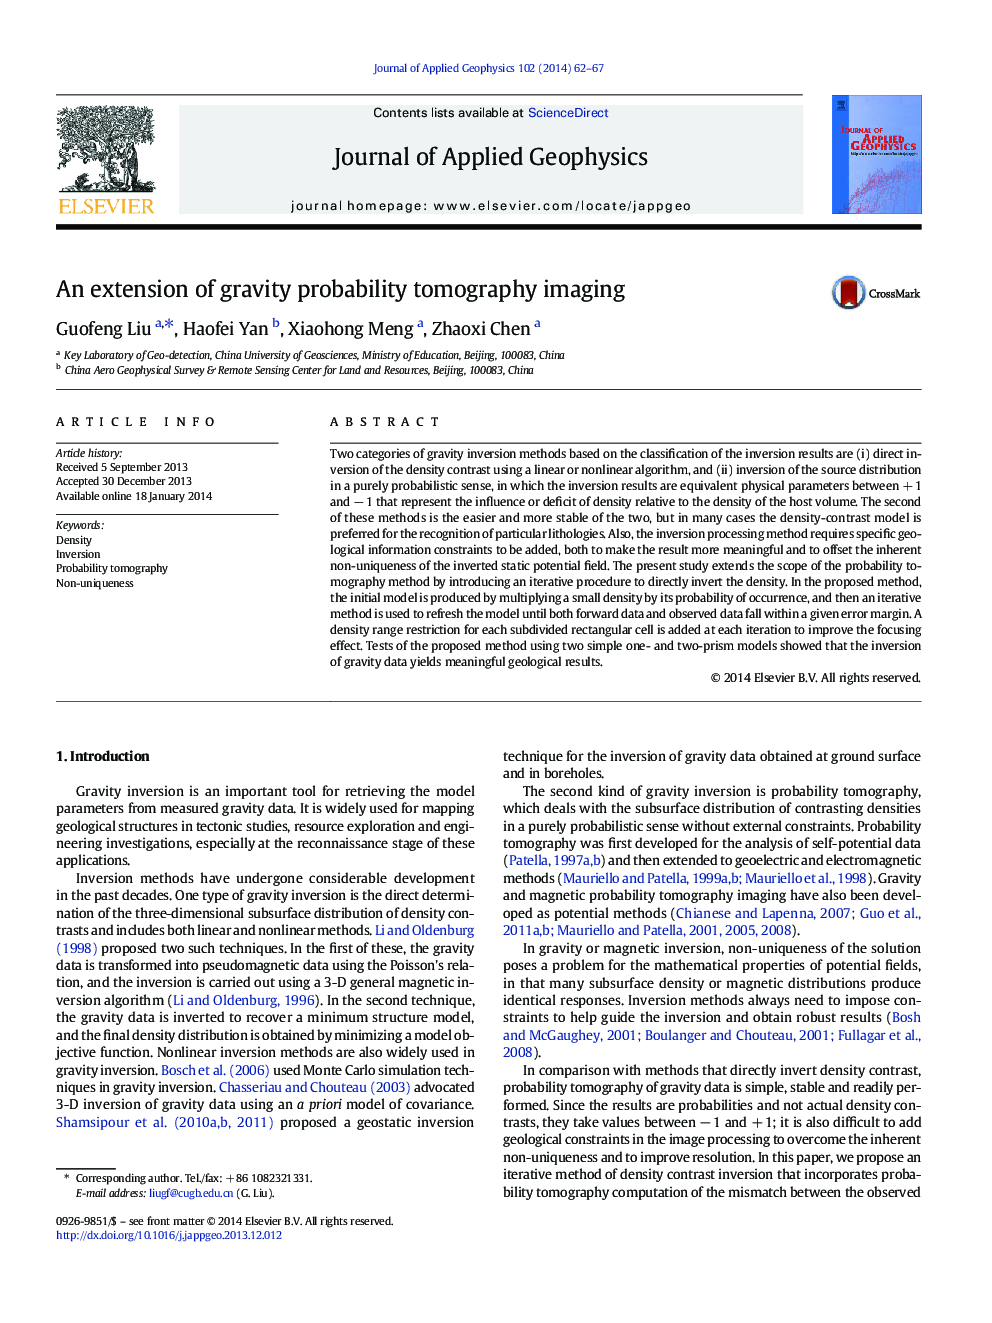 An extension of gravity probability tomography imaging